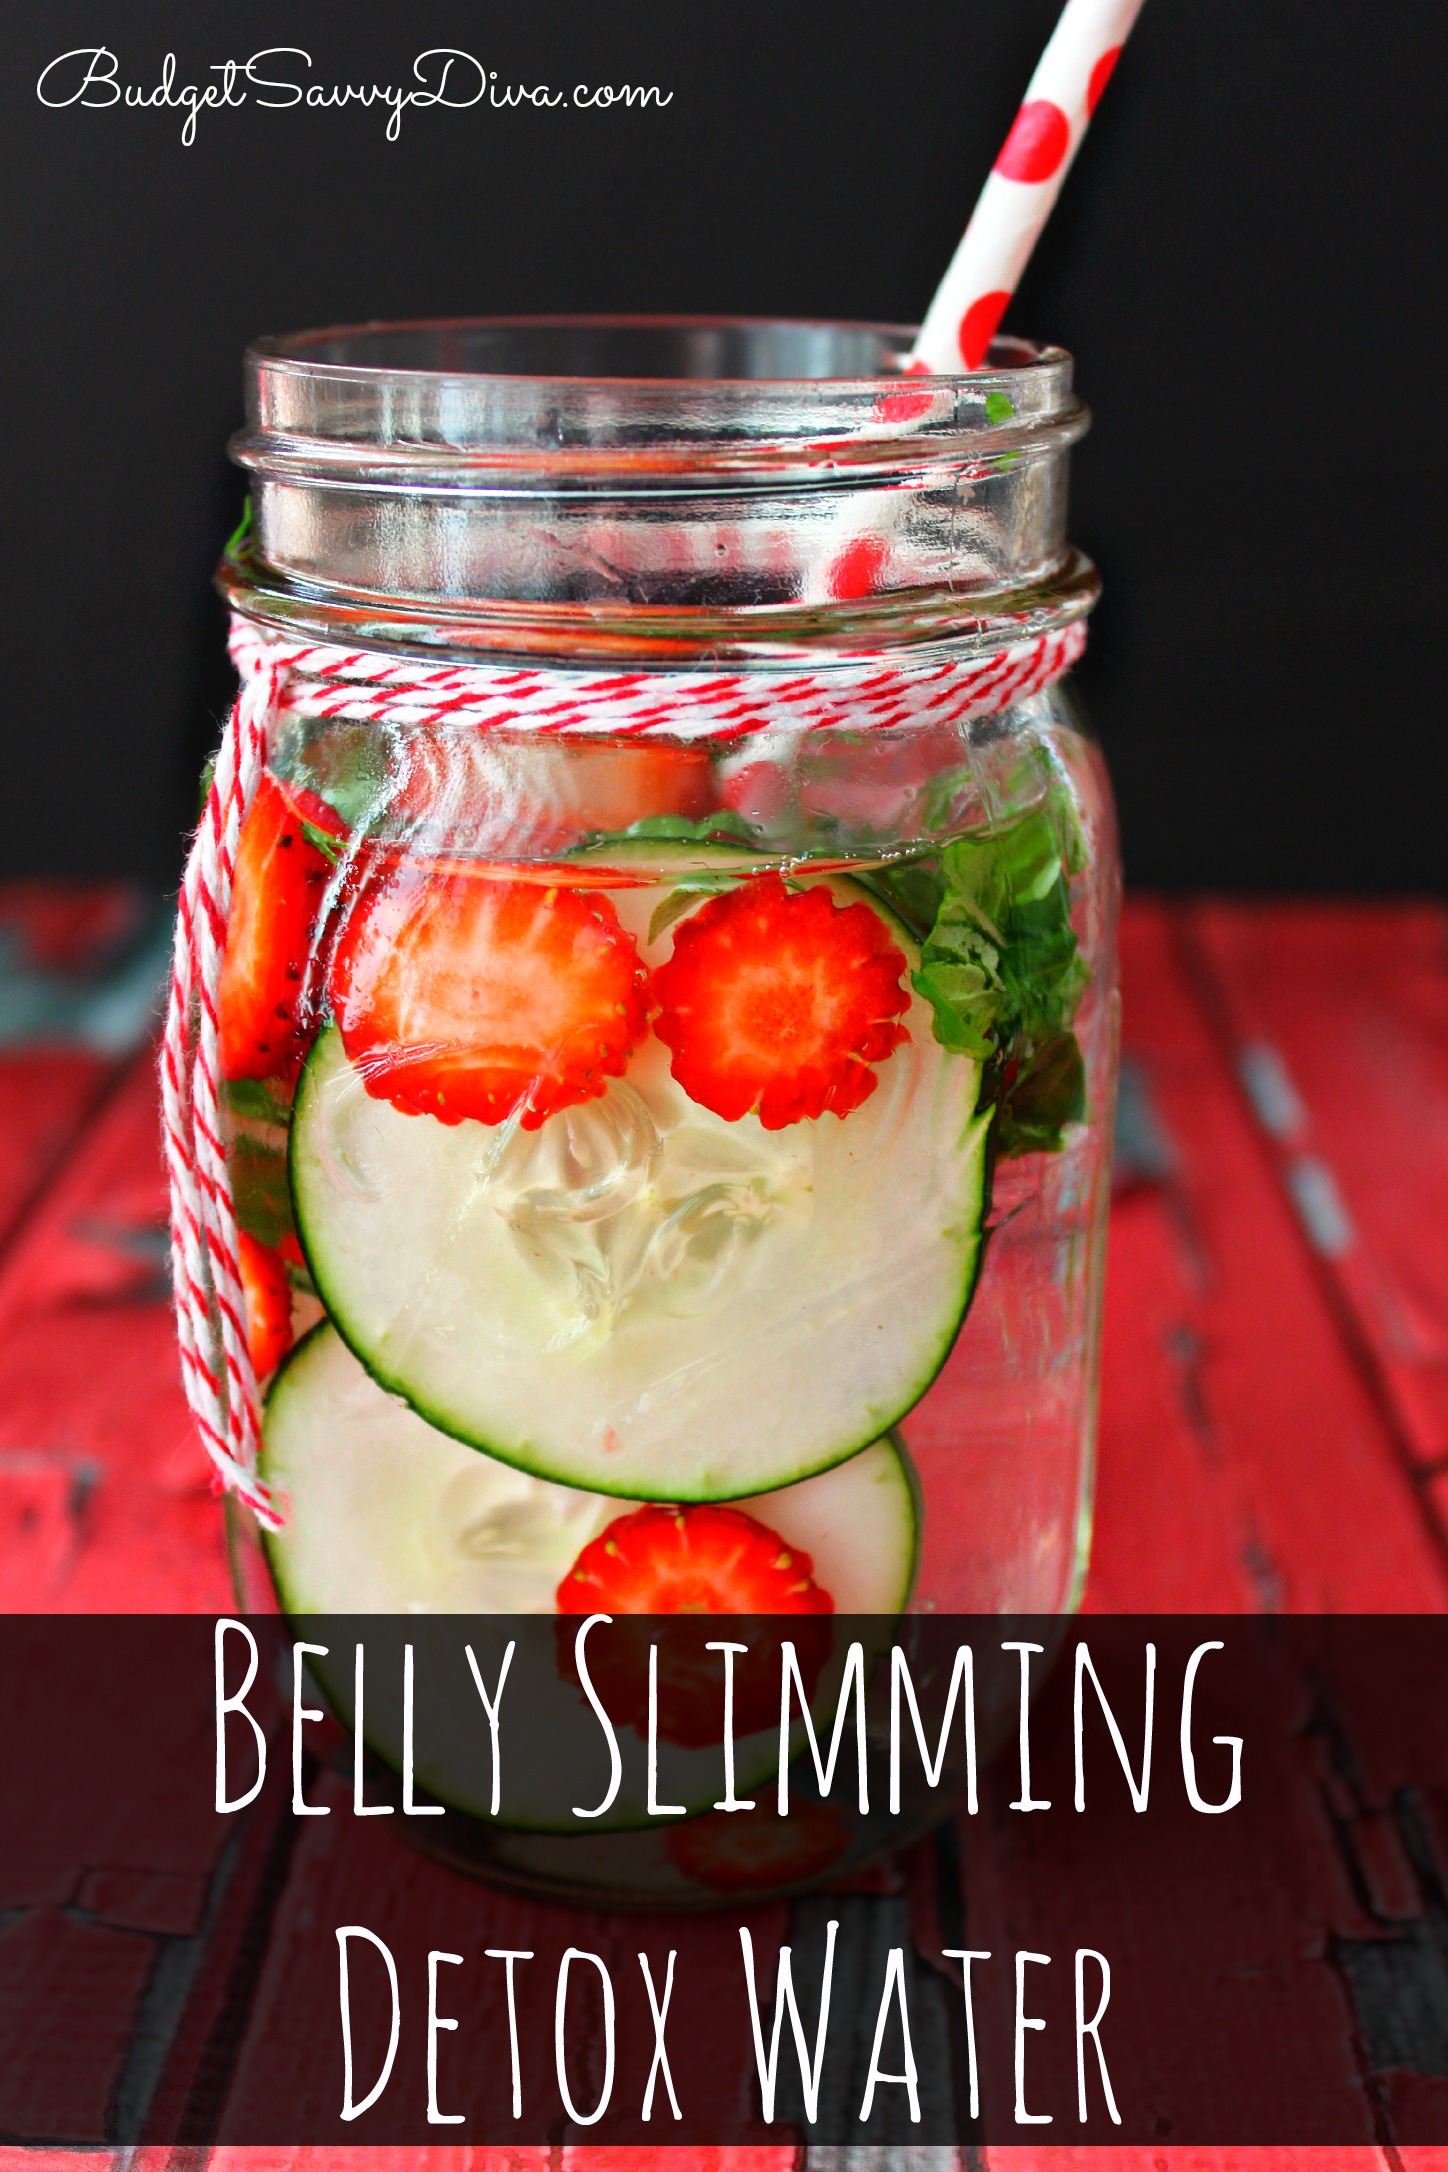 Belly Slimming Detox Water Recipe - Weight Loss Tips